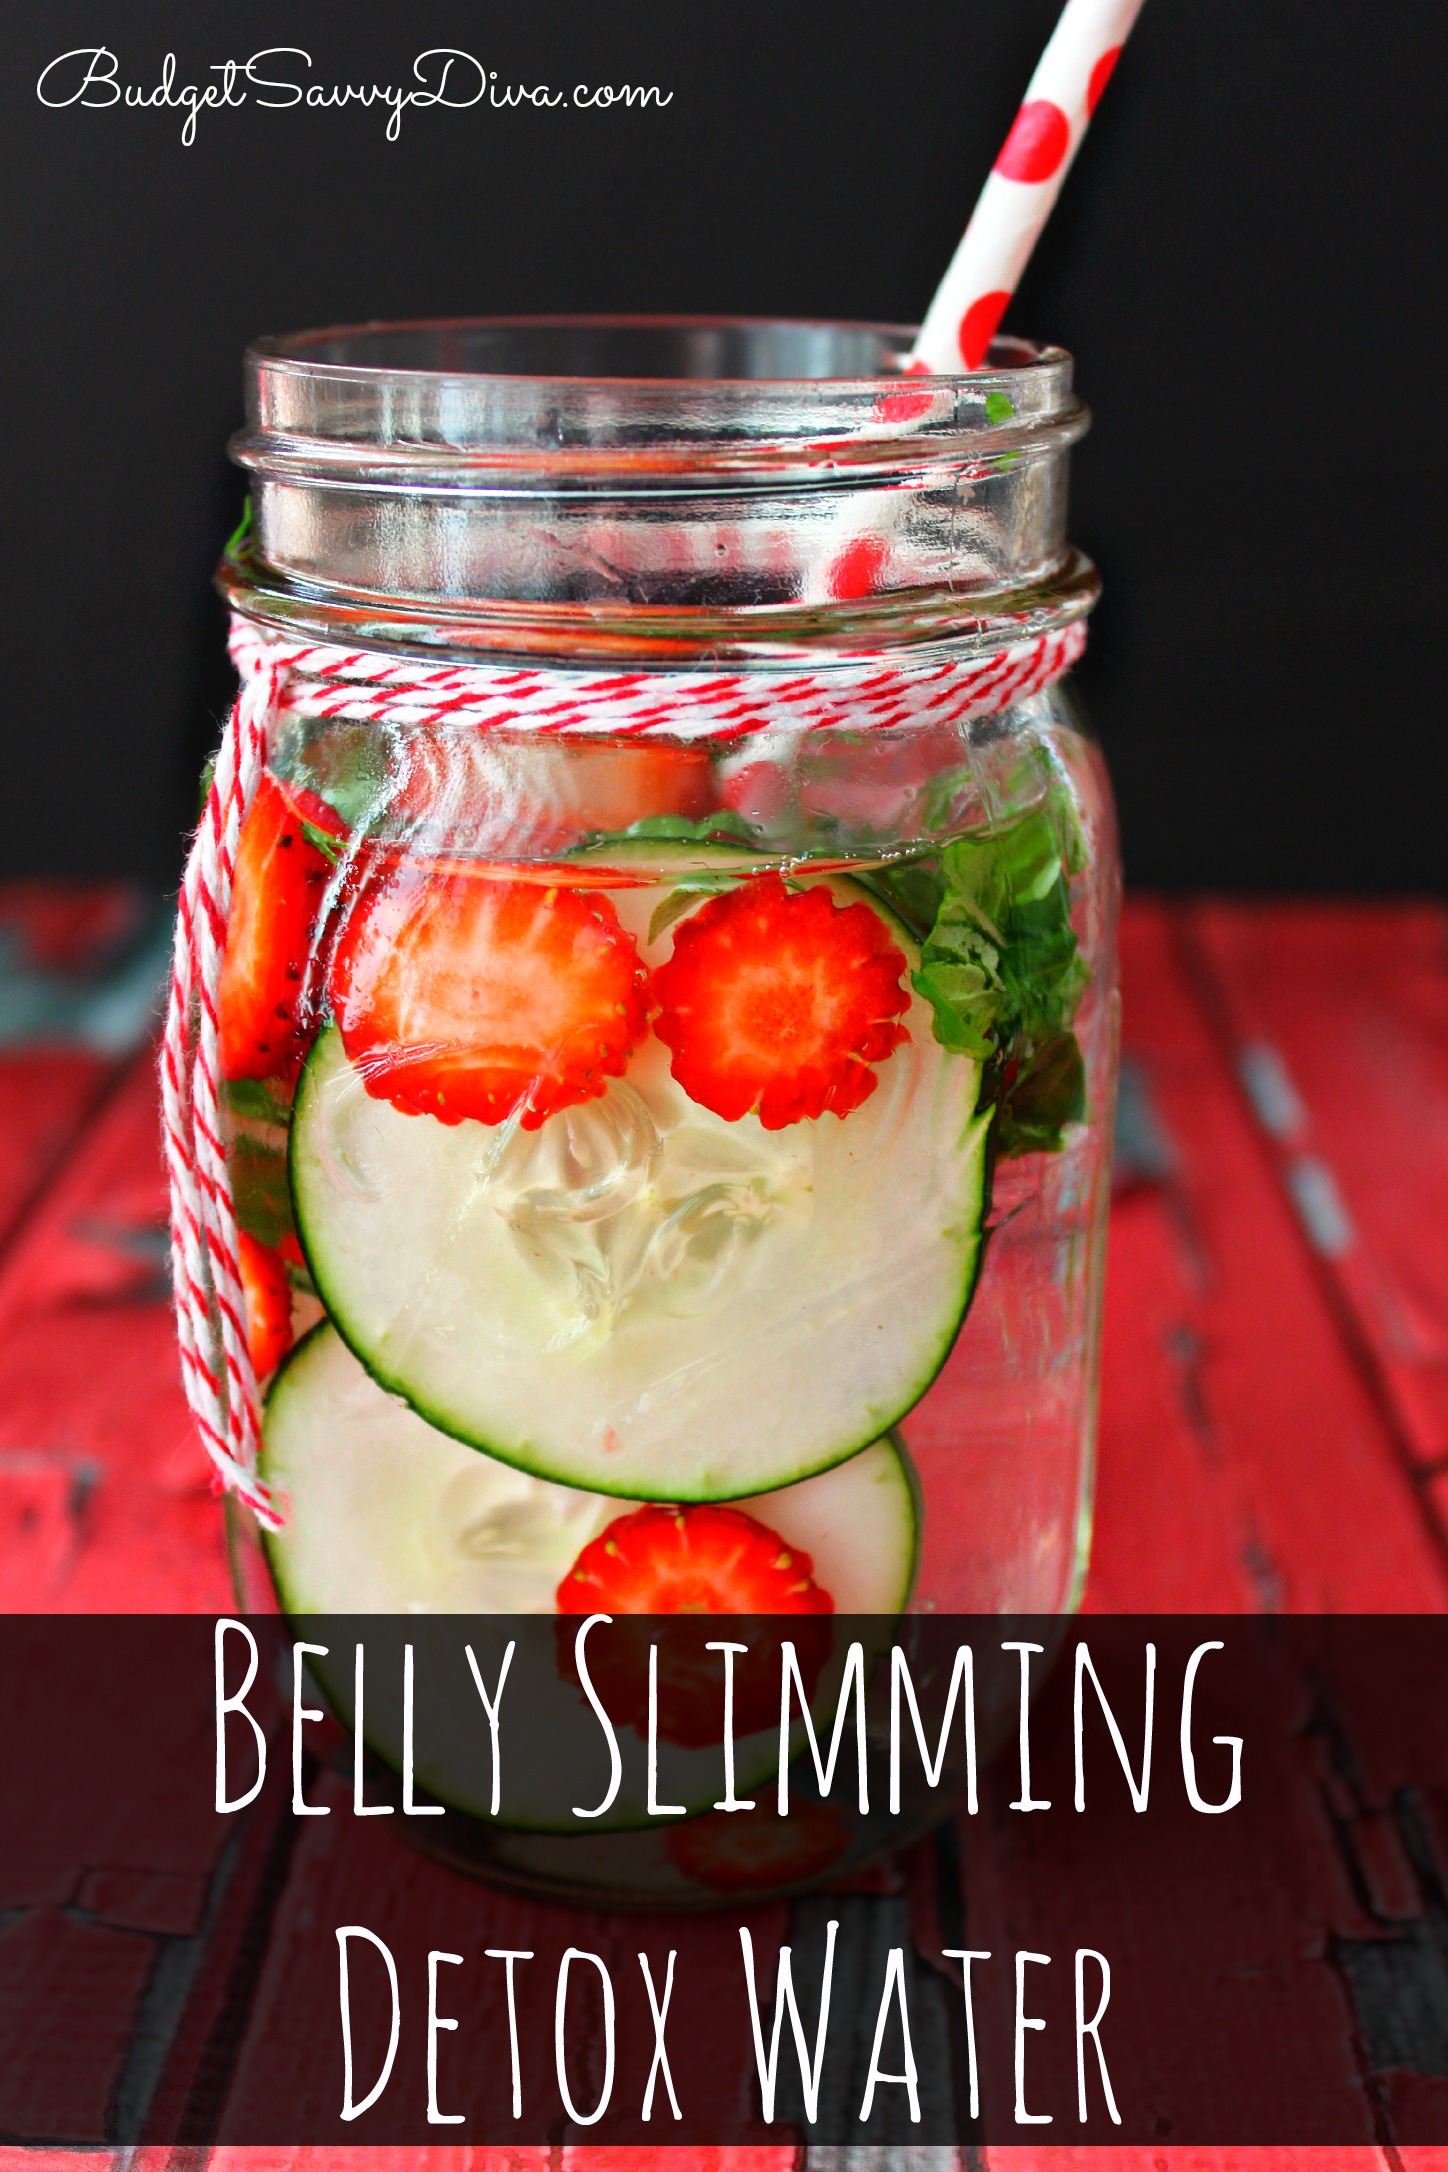 Belly Slimming Detox Water Recipe - Weight Loss Tips